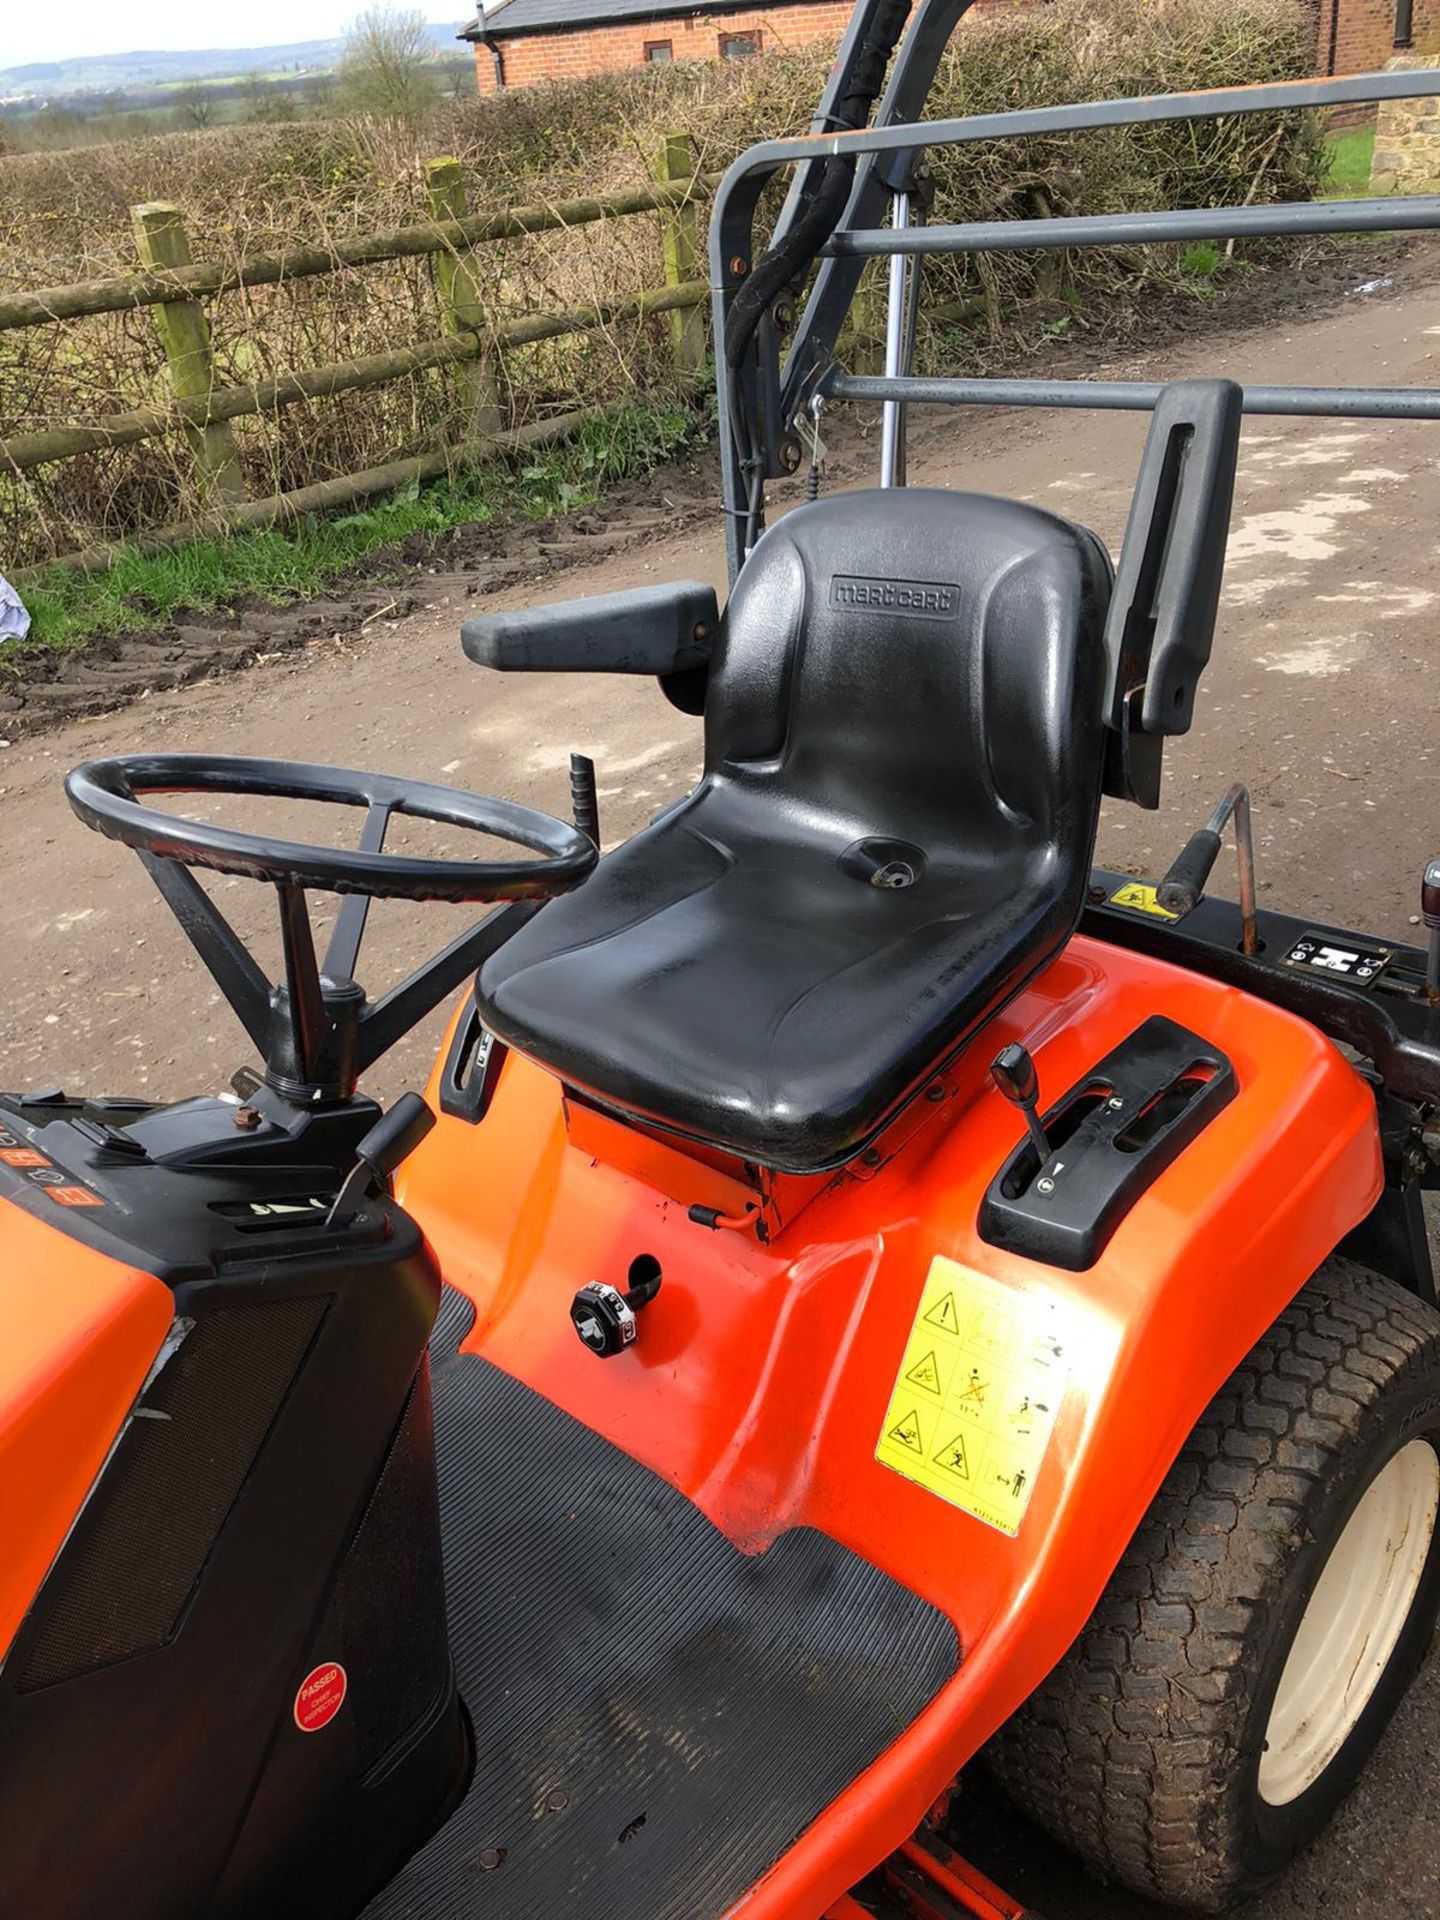 KUBOTA G18 HIGH LIFT RIDE ON LAWN MOWER, POWER STEERING, HIGH LIFT GRASS COLLECTOR, LOW HOURS - Image 6 of 8